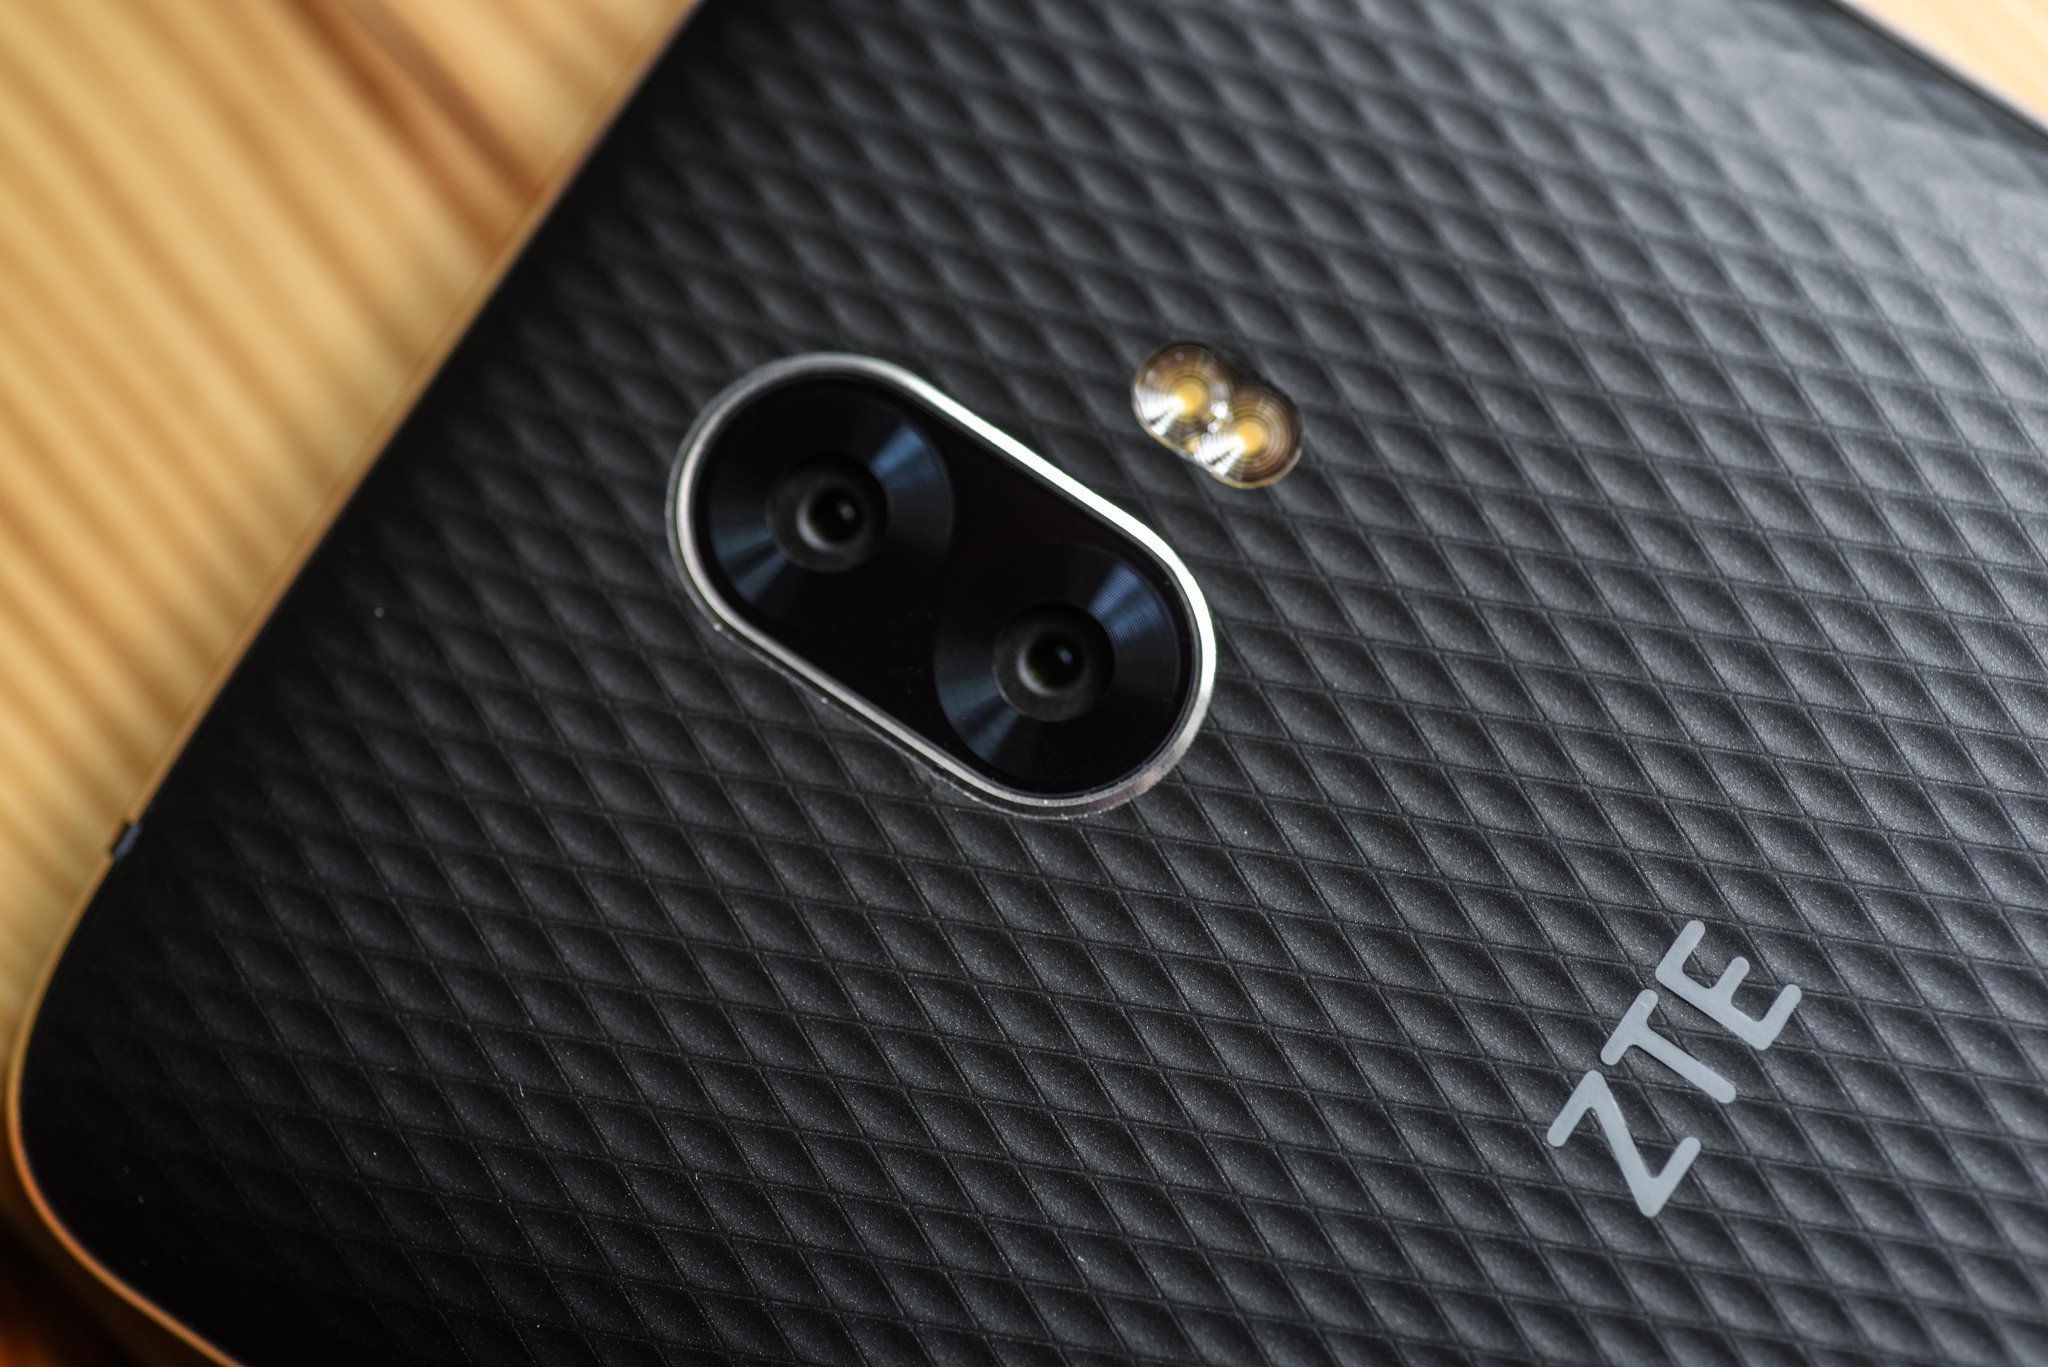 ZTE shuts down operations due to United States ban